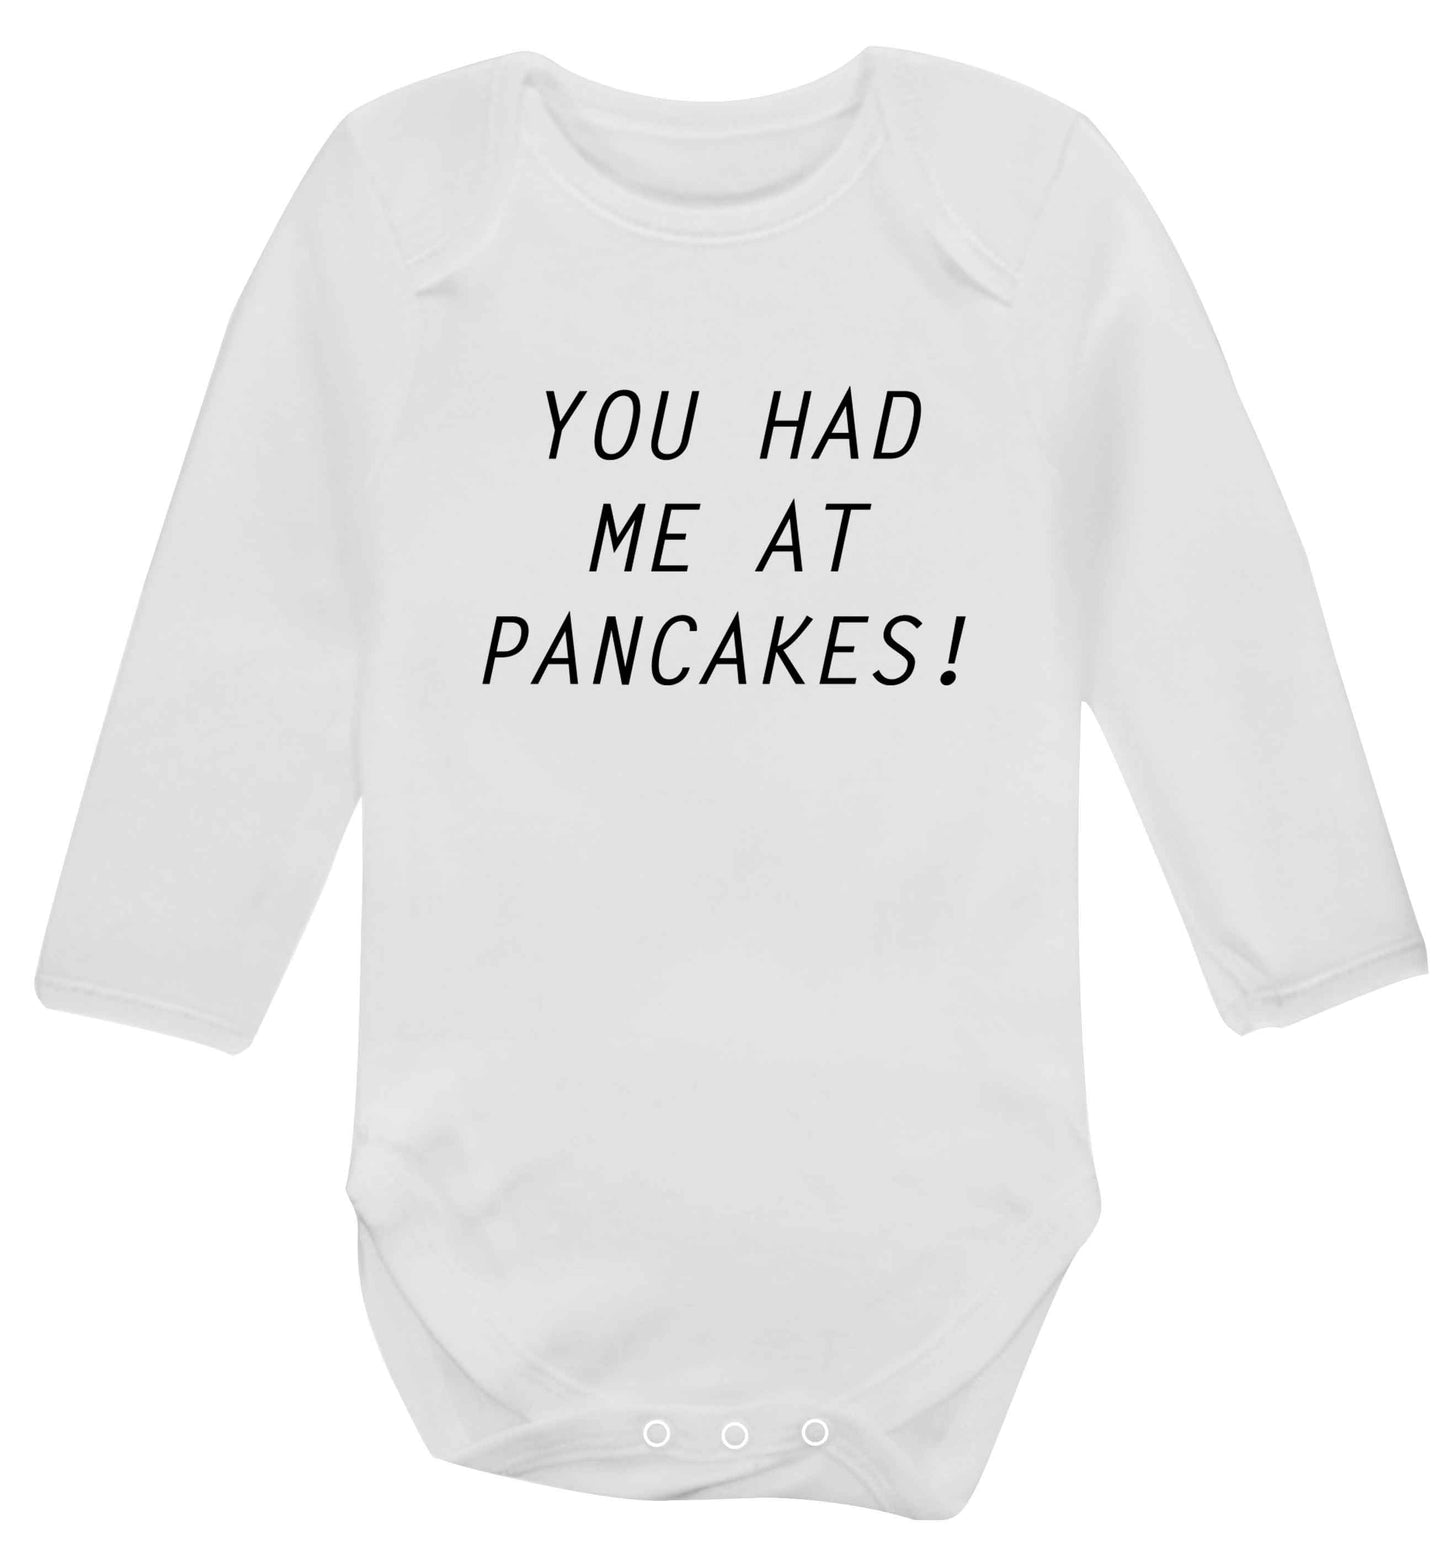 You had me at pancakes baby vest long sleeved white 6-12 months